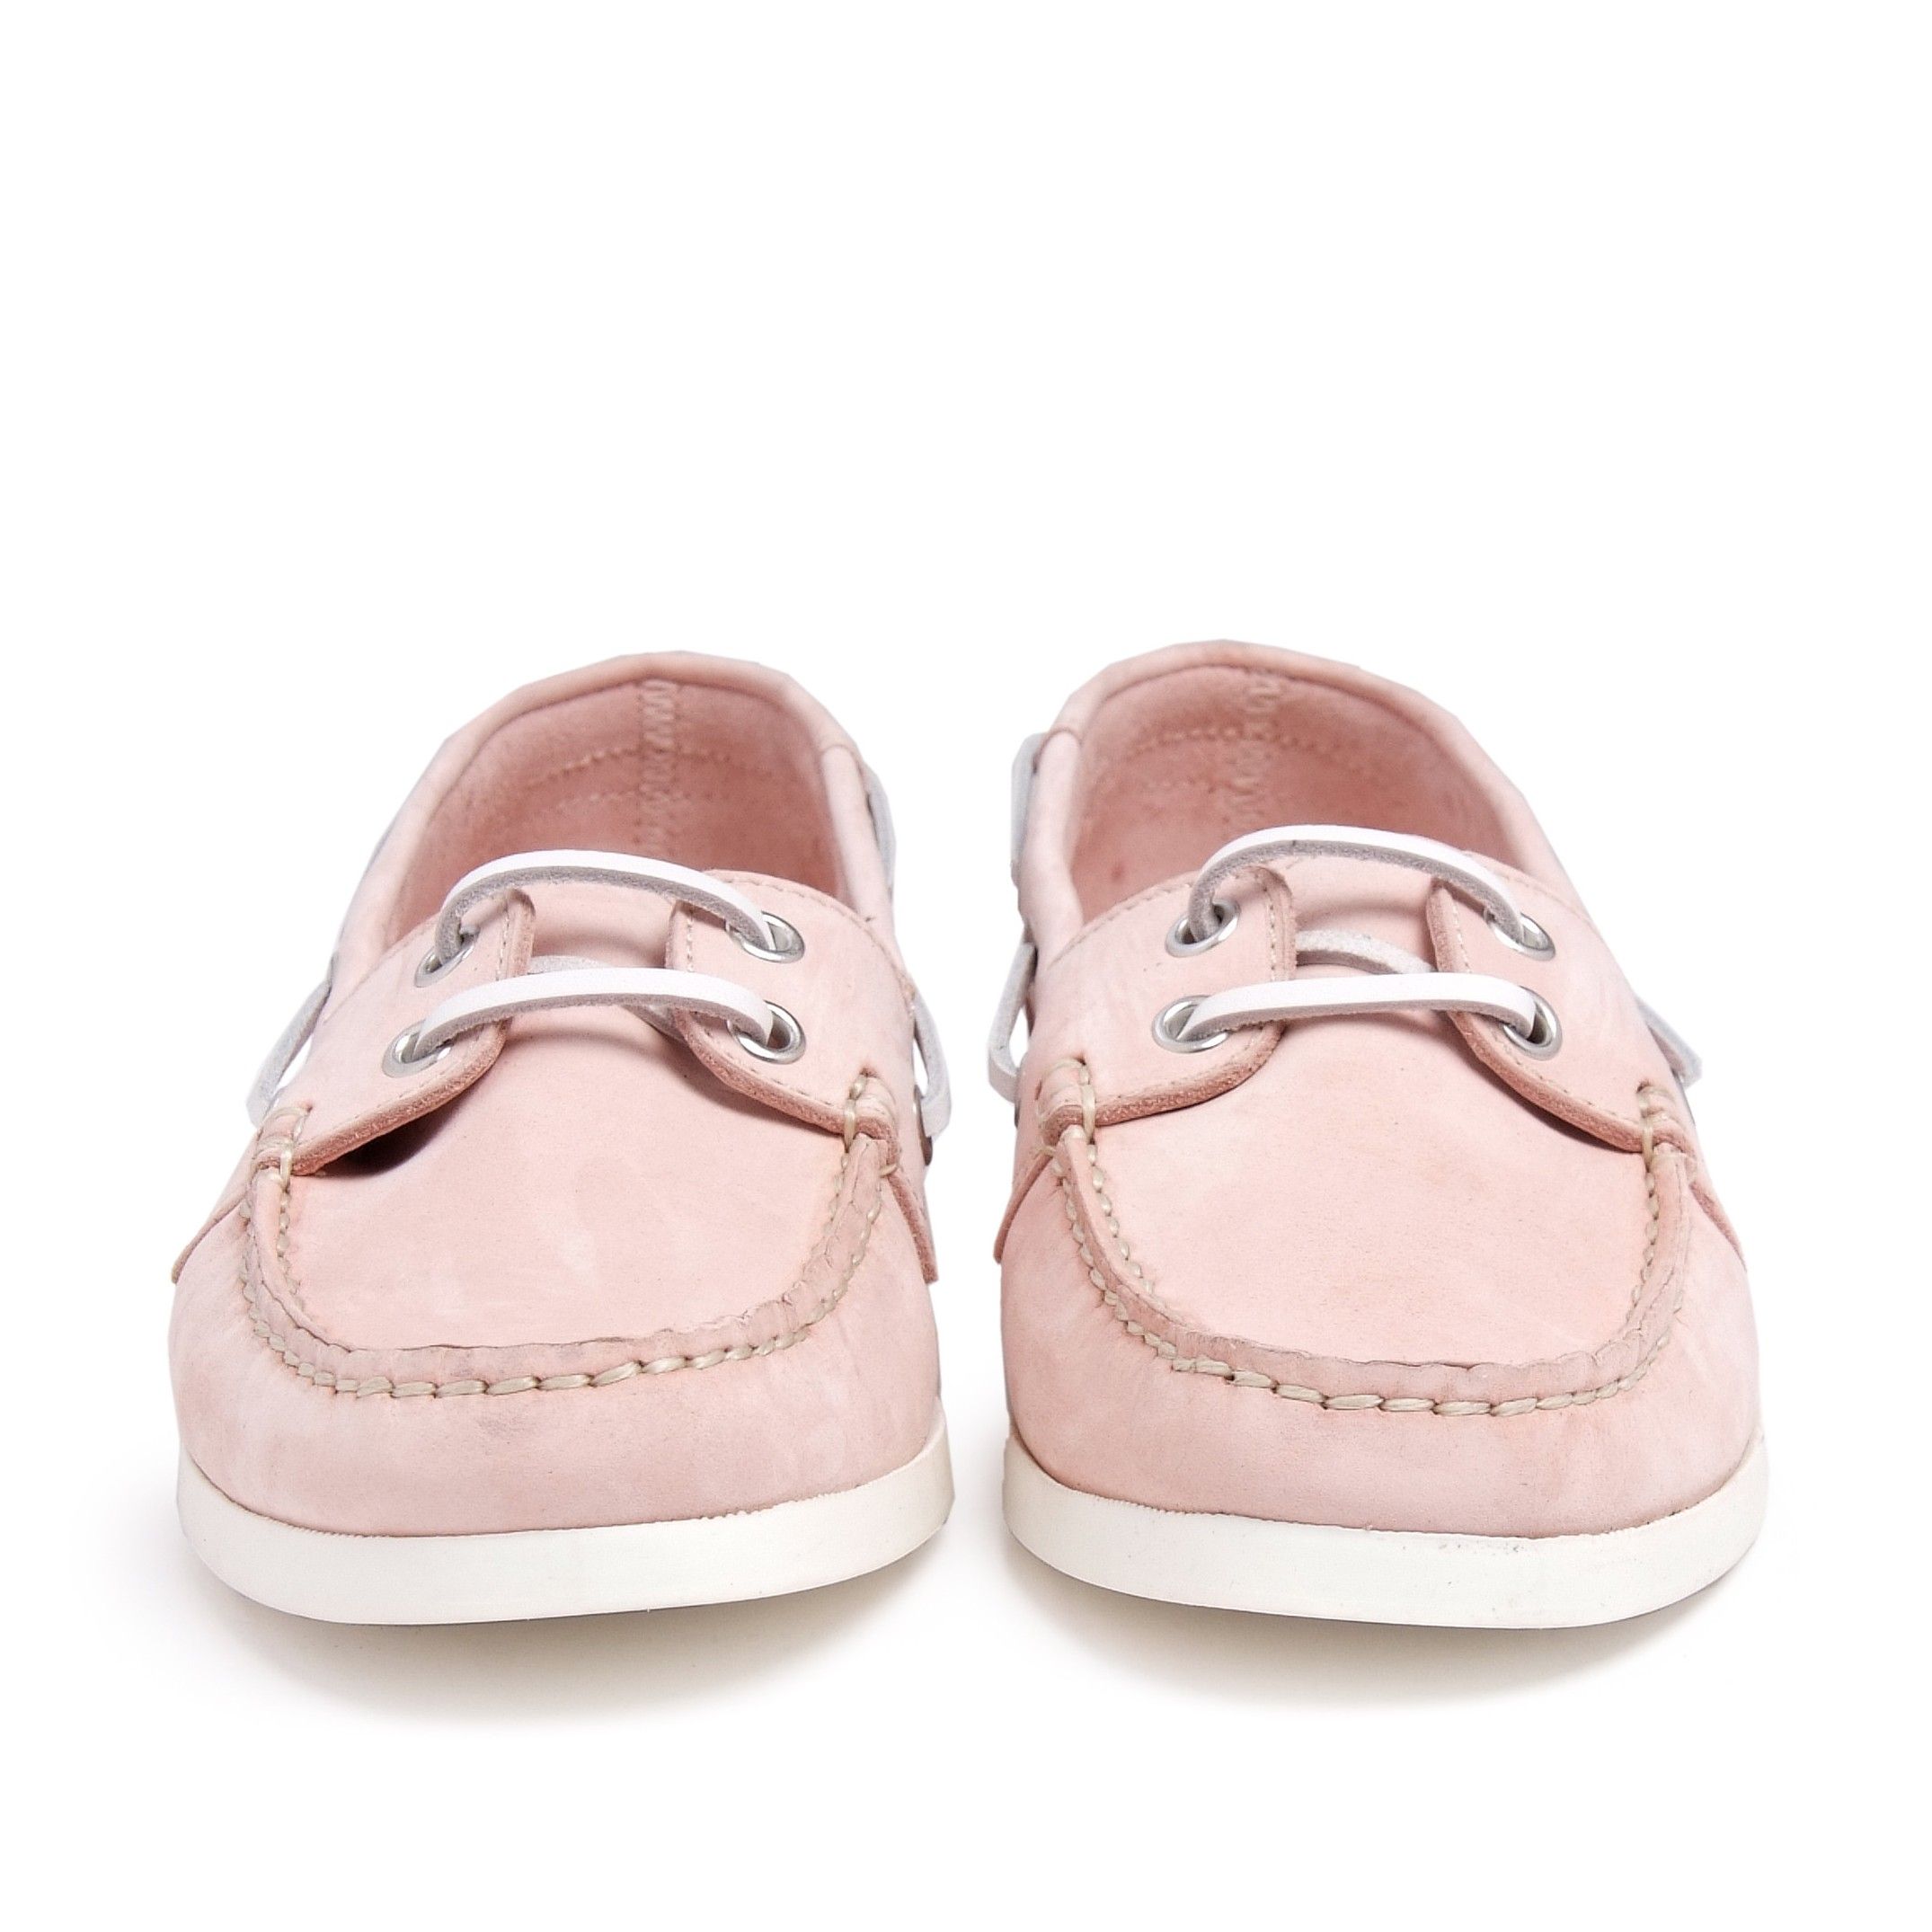 Leather Boat Shoes for Women Laces Pink Castellanisimos